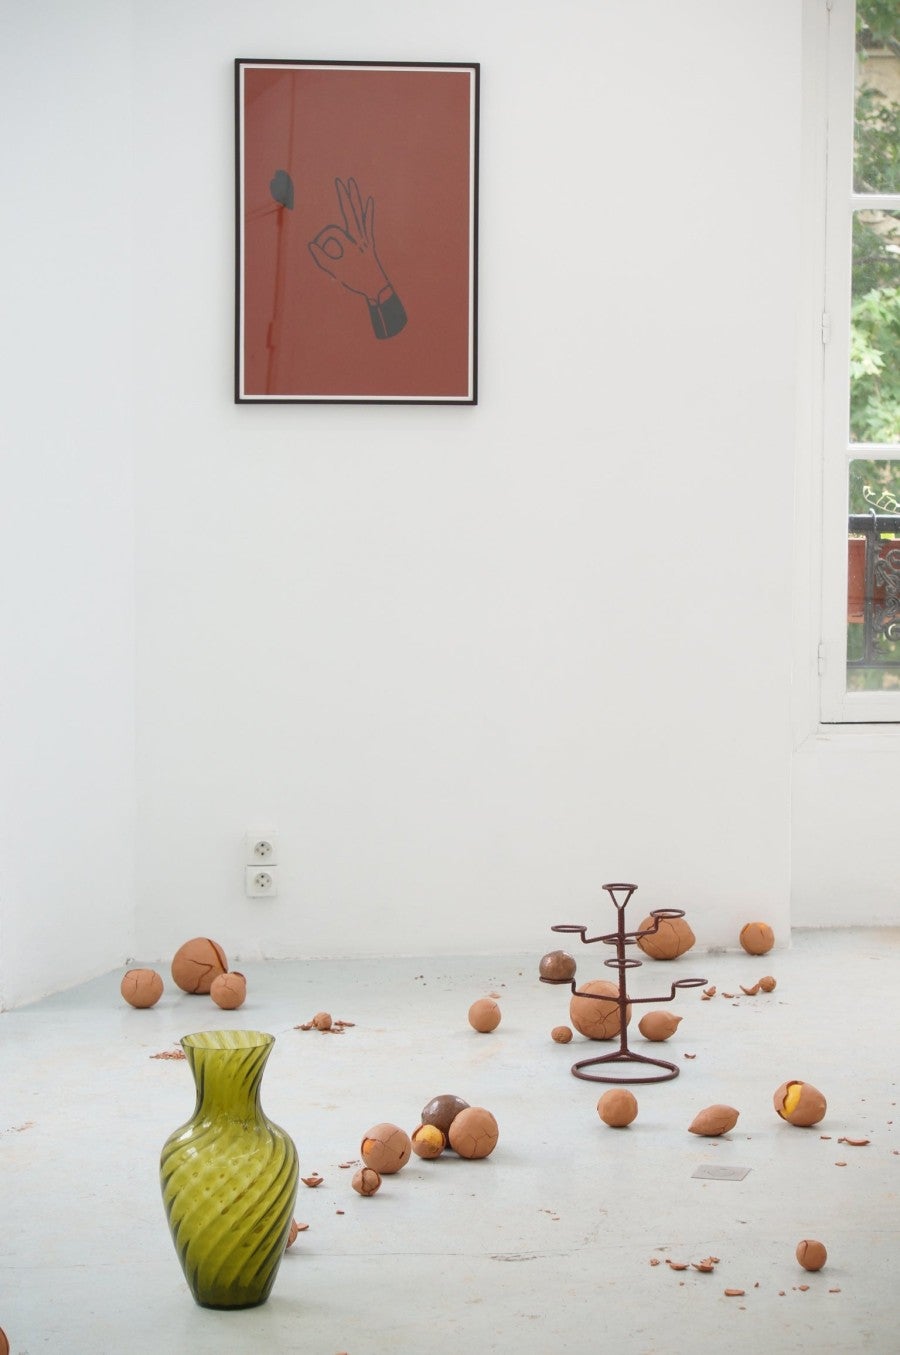 Chloé Quenum, exhibition view of Châtaignes, Galerie Joseph Tang, Paris, 2018. Tattoo (pourpre), 2018, ink drawing on paper, 71 x 51 cm, Châtaignes, 2018, fruits covered with clay and copper according to a protocol, vase, metal fruit holder, variable dimensions.